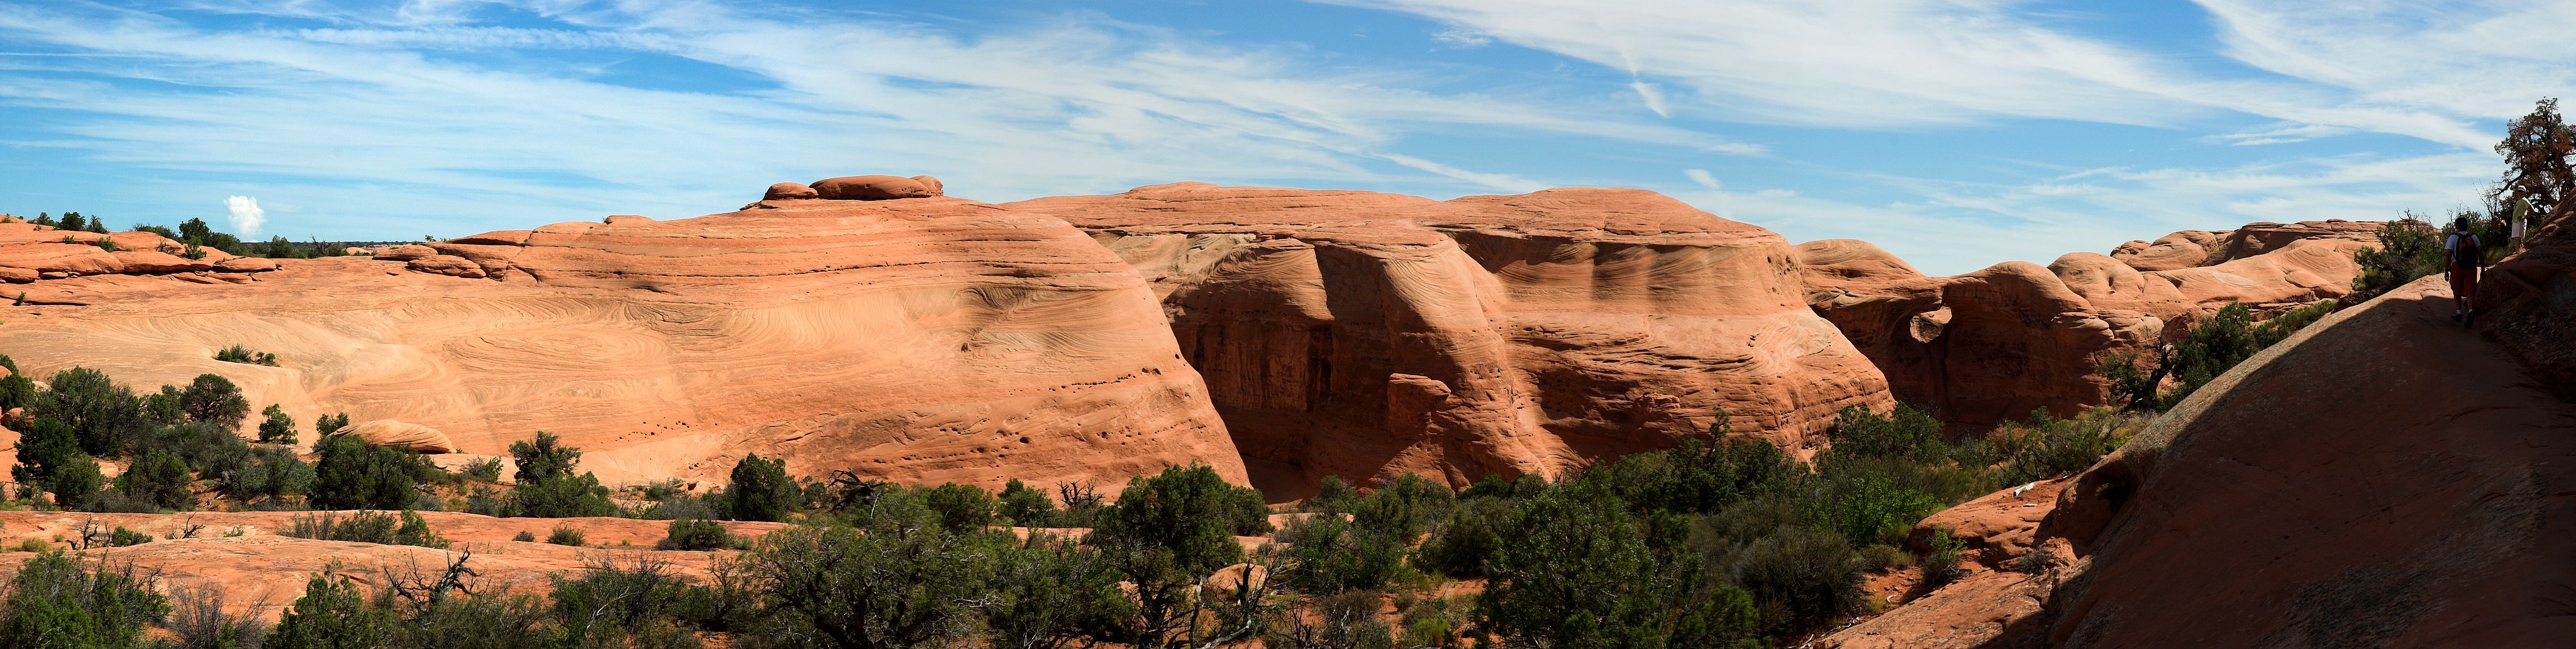 On the Way to Delicate Arch 2.jpg